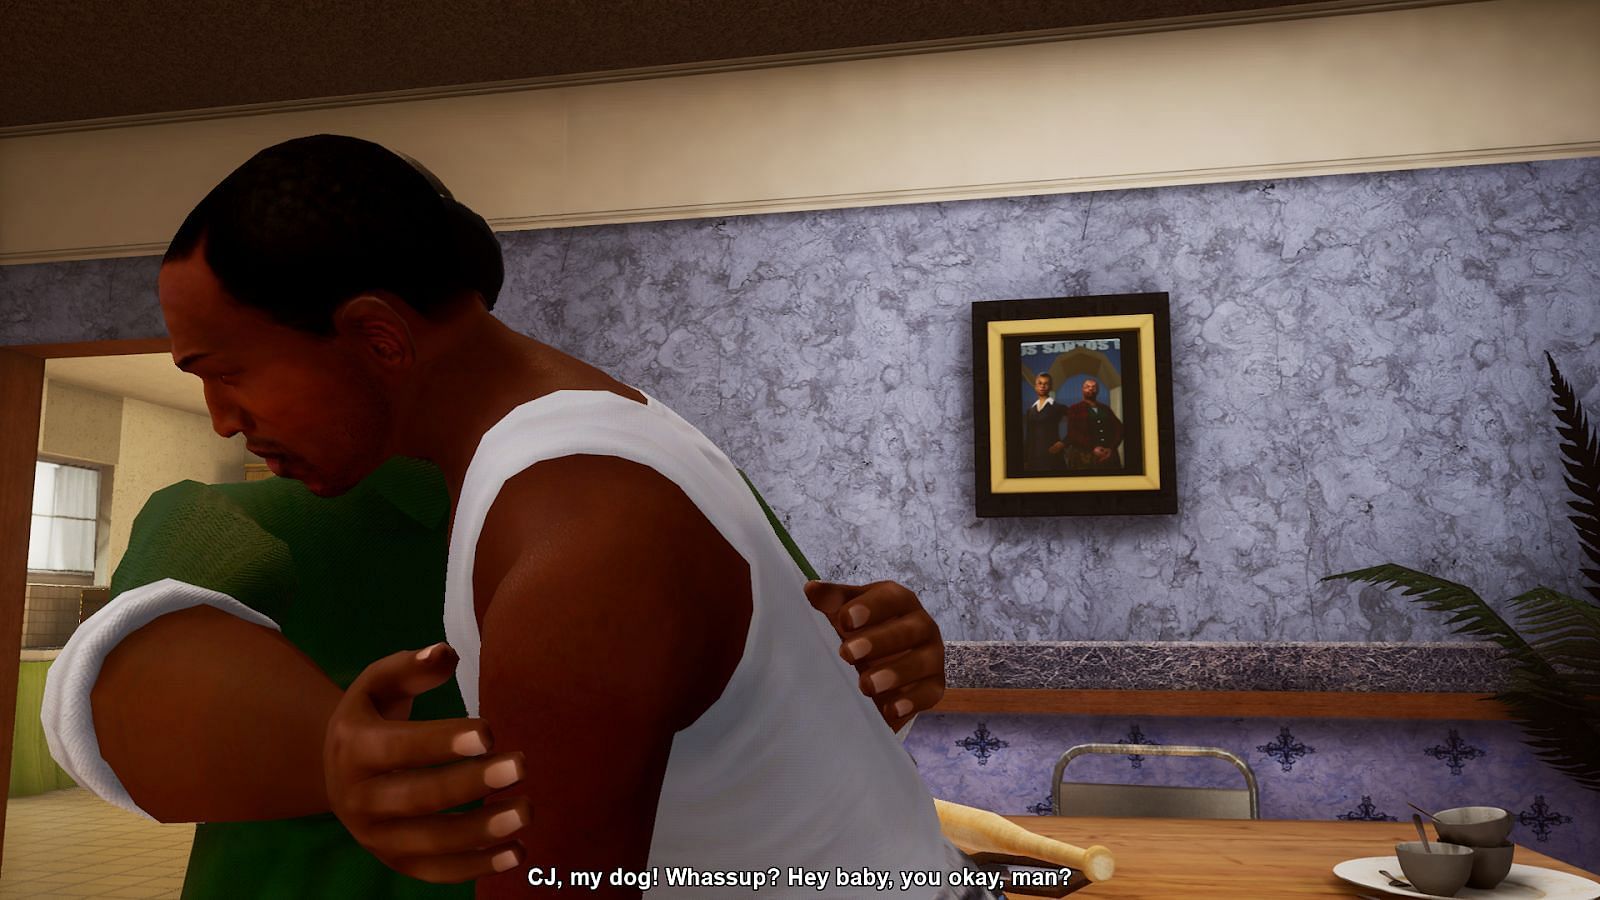 Big Smoke and CJ in the game (Image by Rockstar)